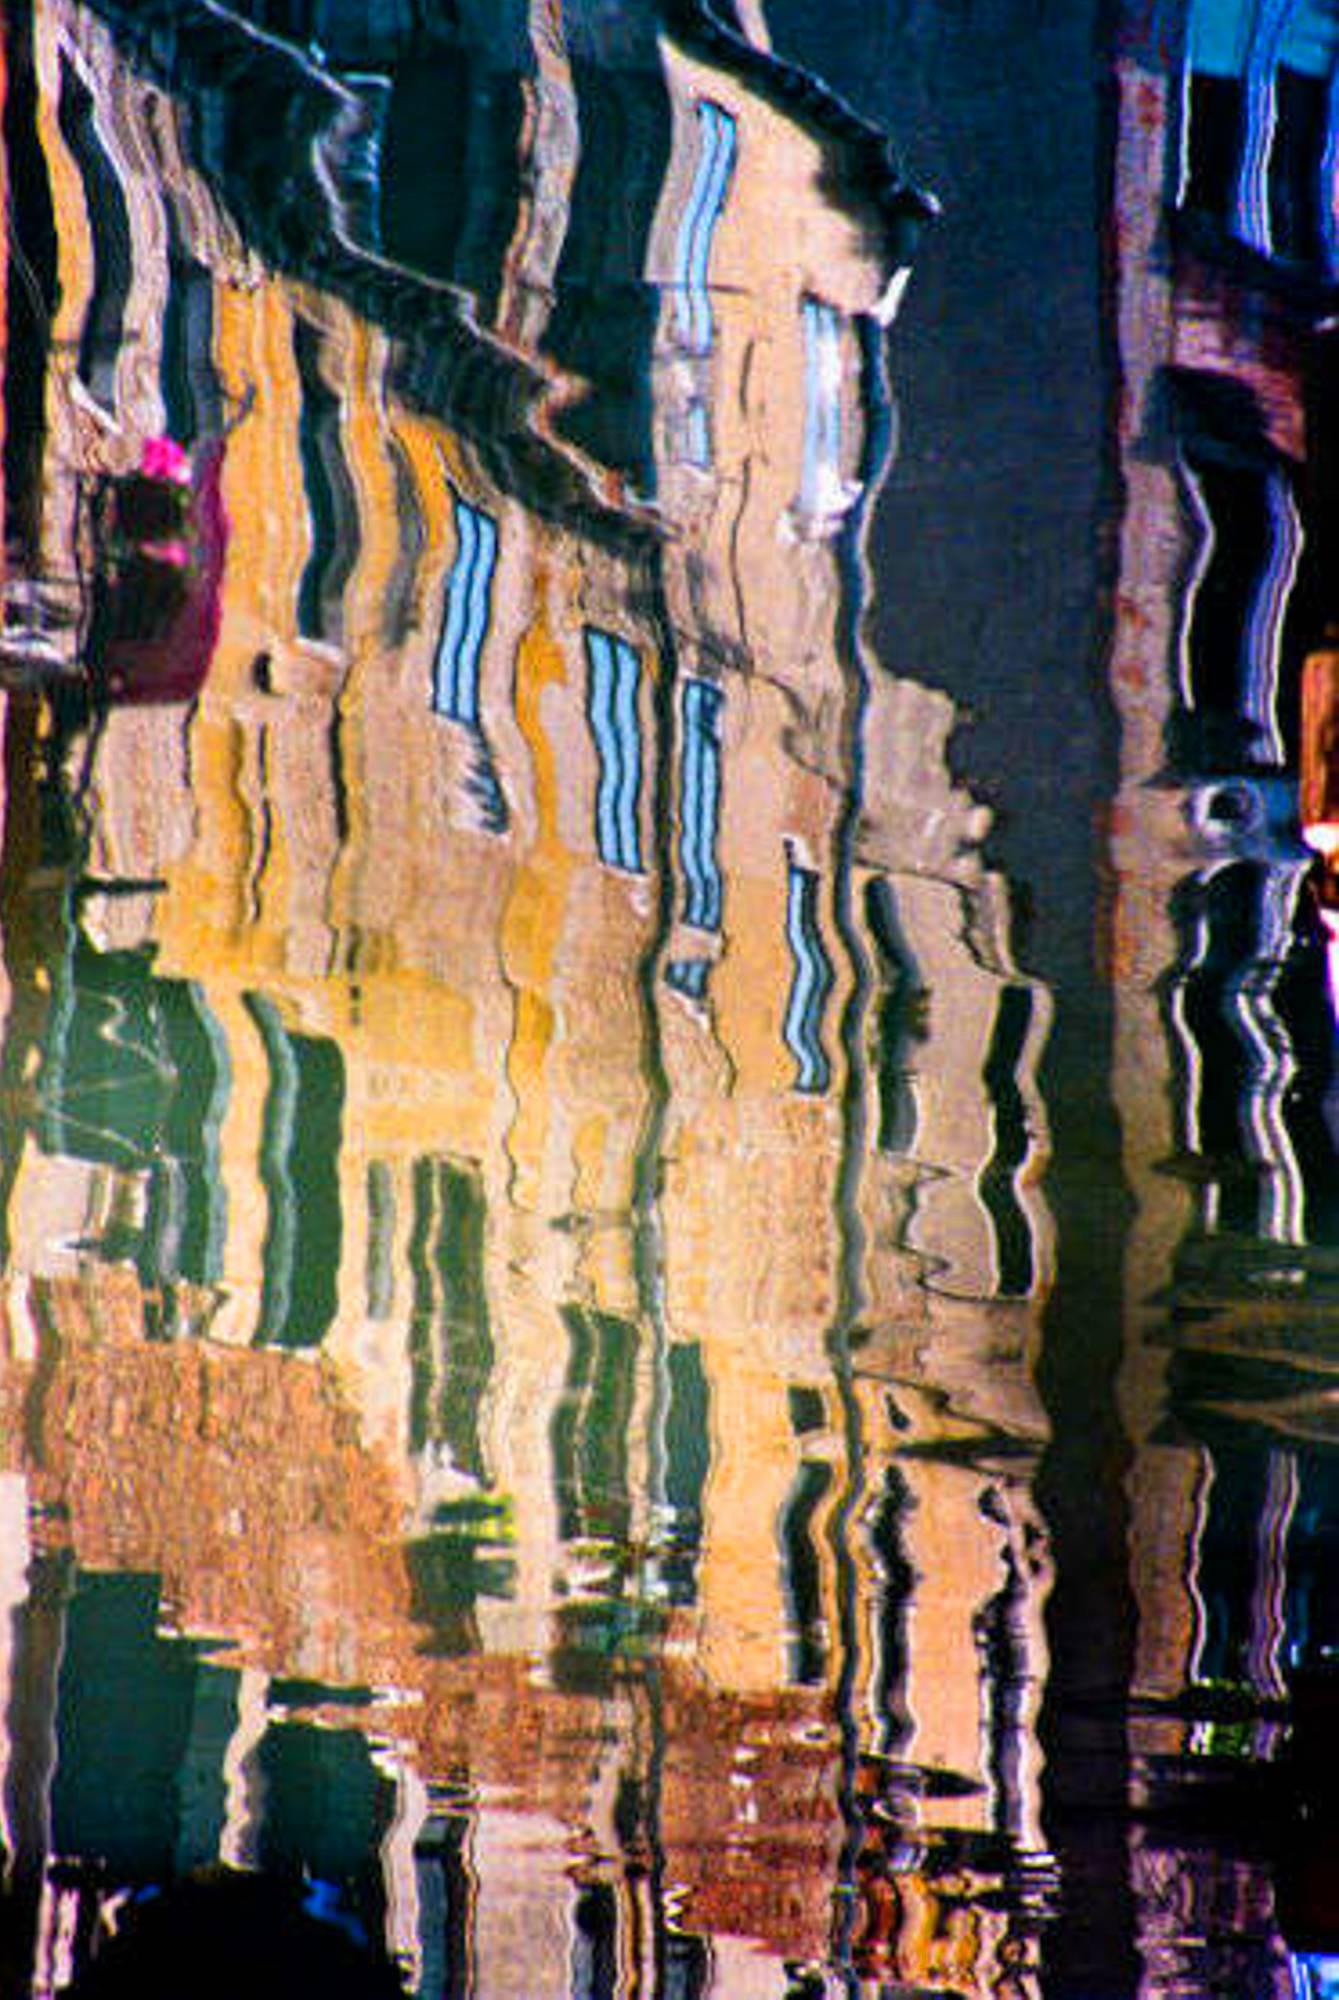 Robert Herman Abstract Photograph - Canal Reflections photograph, Venice, Italy (Venice canals) 